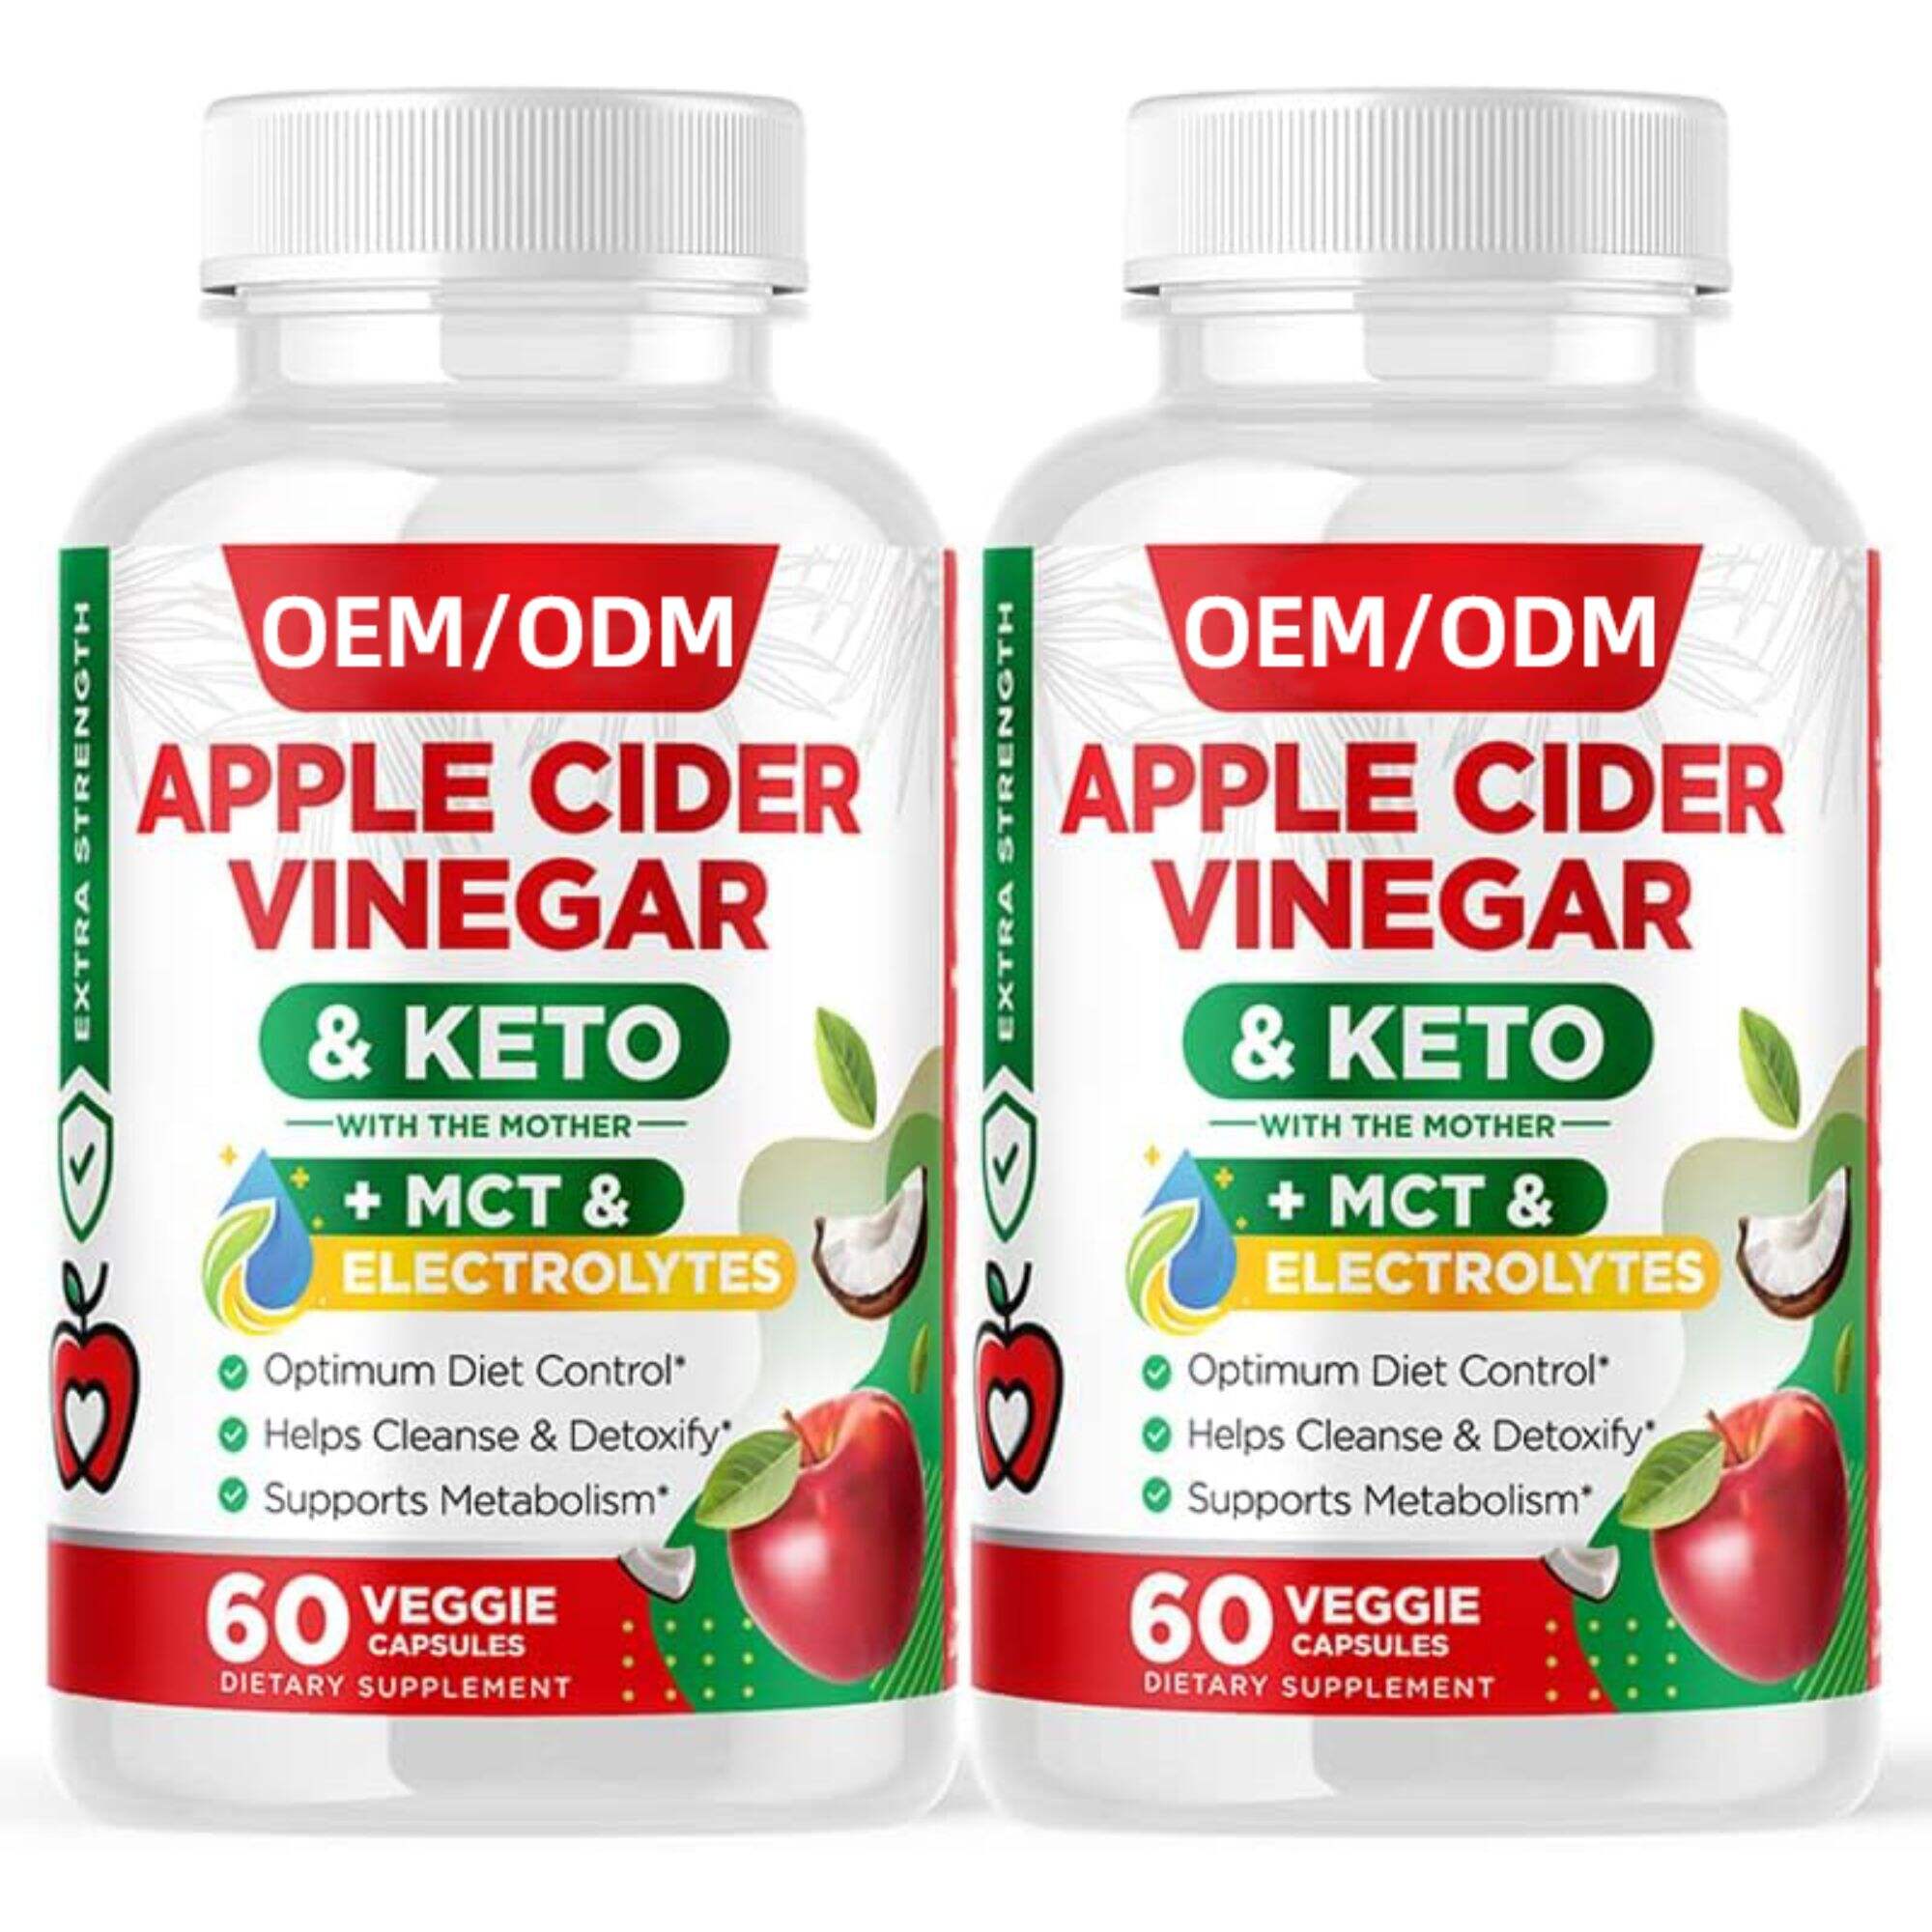 Apple Cider Vinegar Capsules + Keto and MCT Oil for Women & Men - Diet Supplement Helps Cleanse & Detox - Supports Healthy Diet - Vegan ACV Pills with Mother